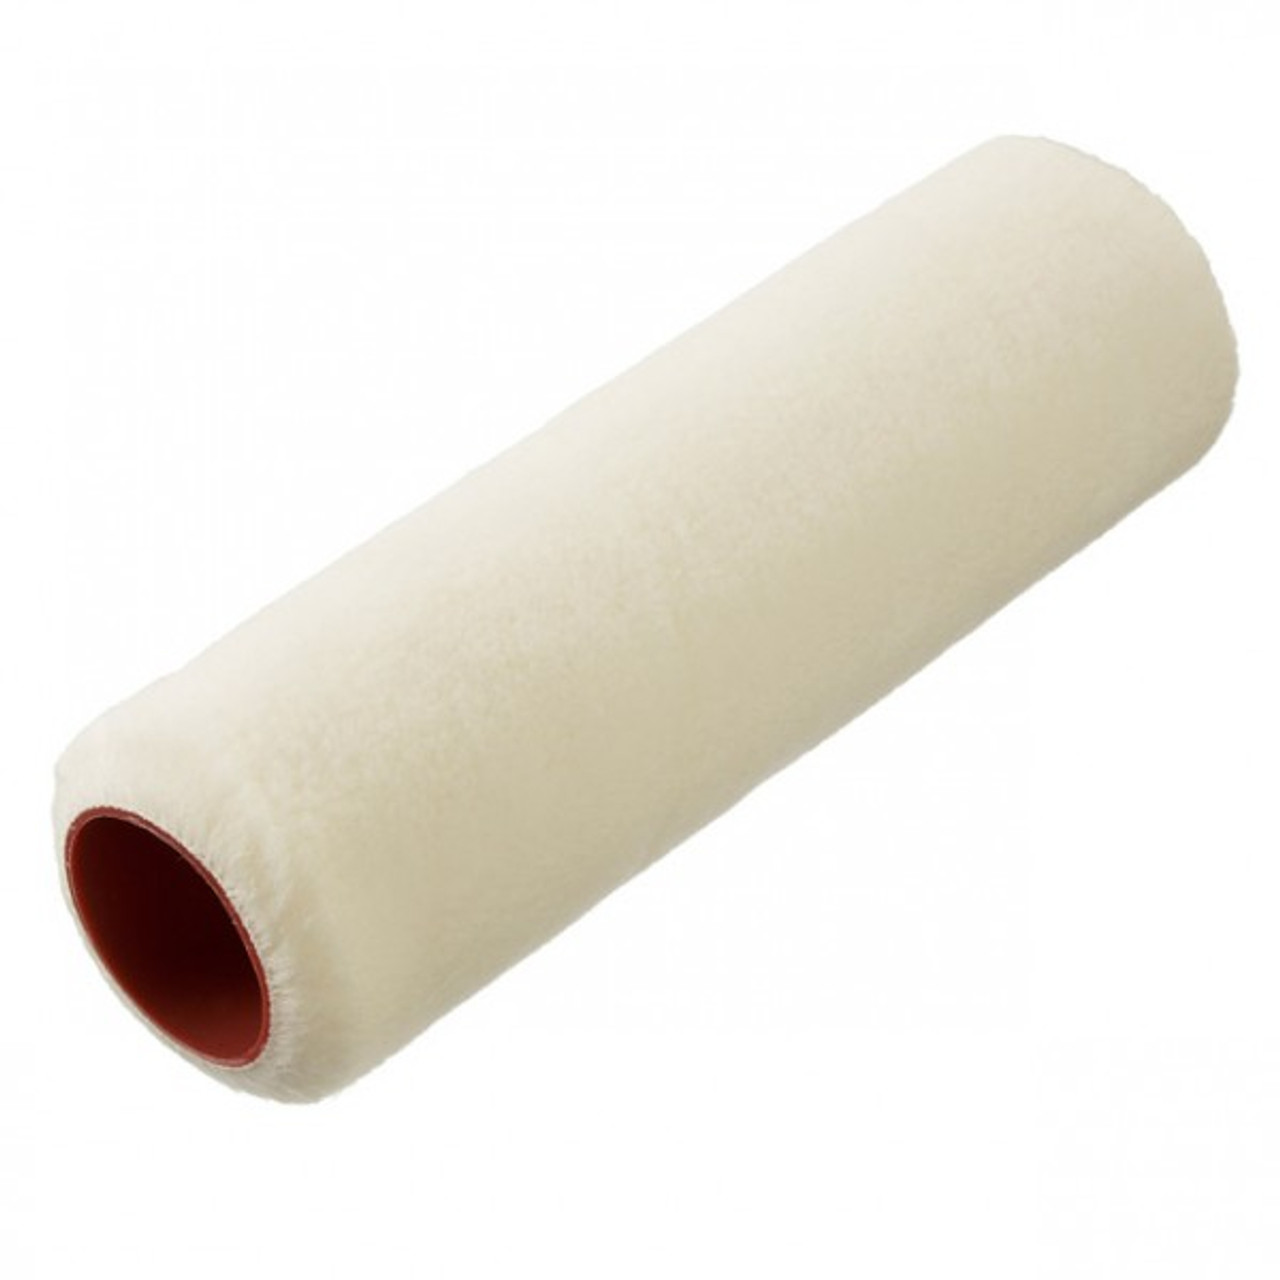 IMPA 510336 SPARE PAINT ROLLER REPLACEMENT 150mm